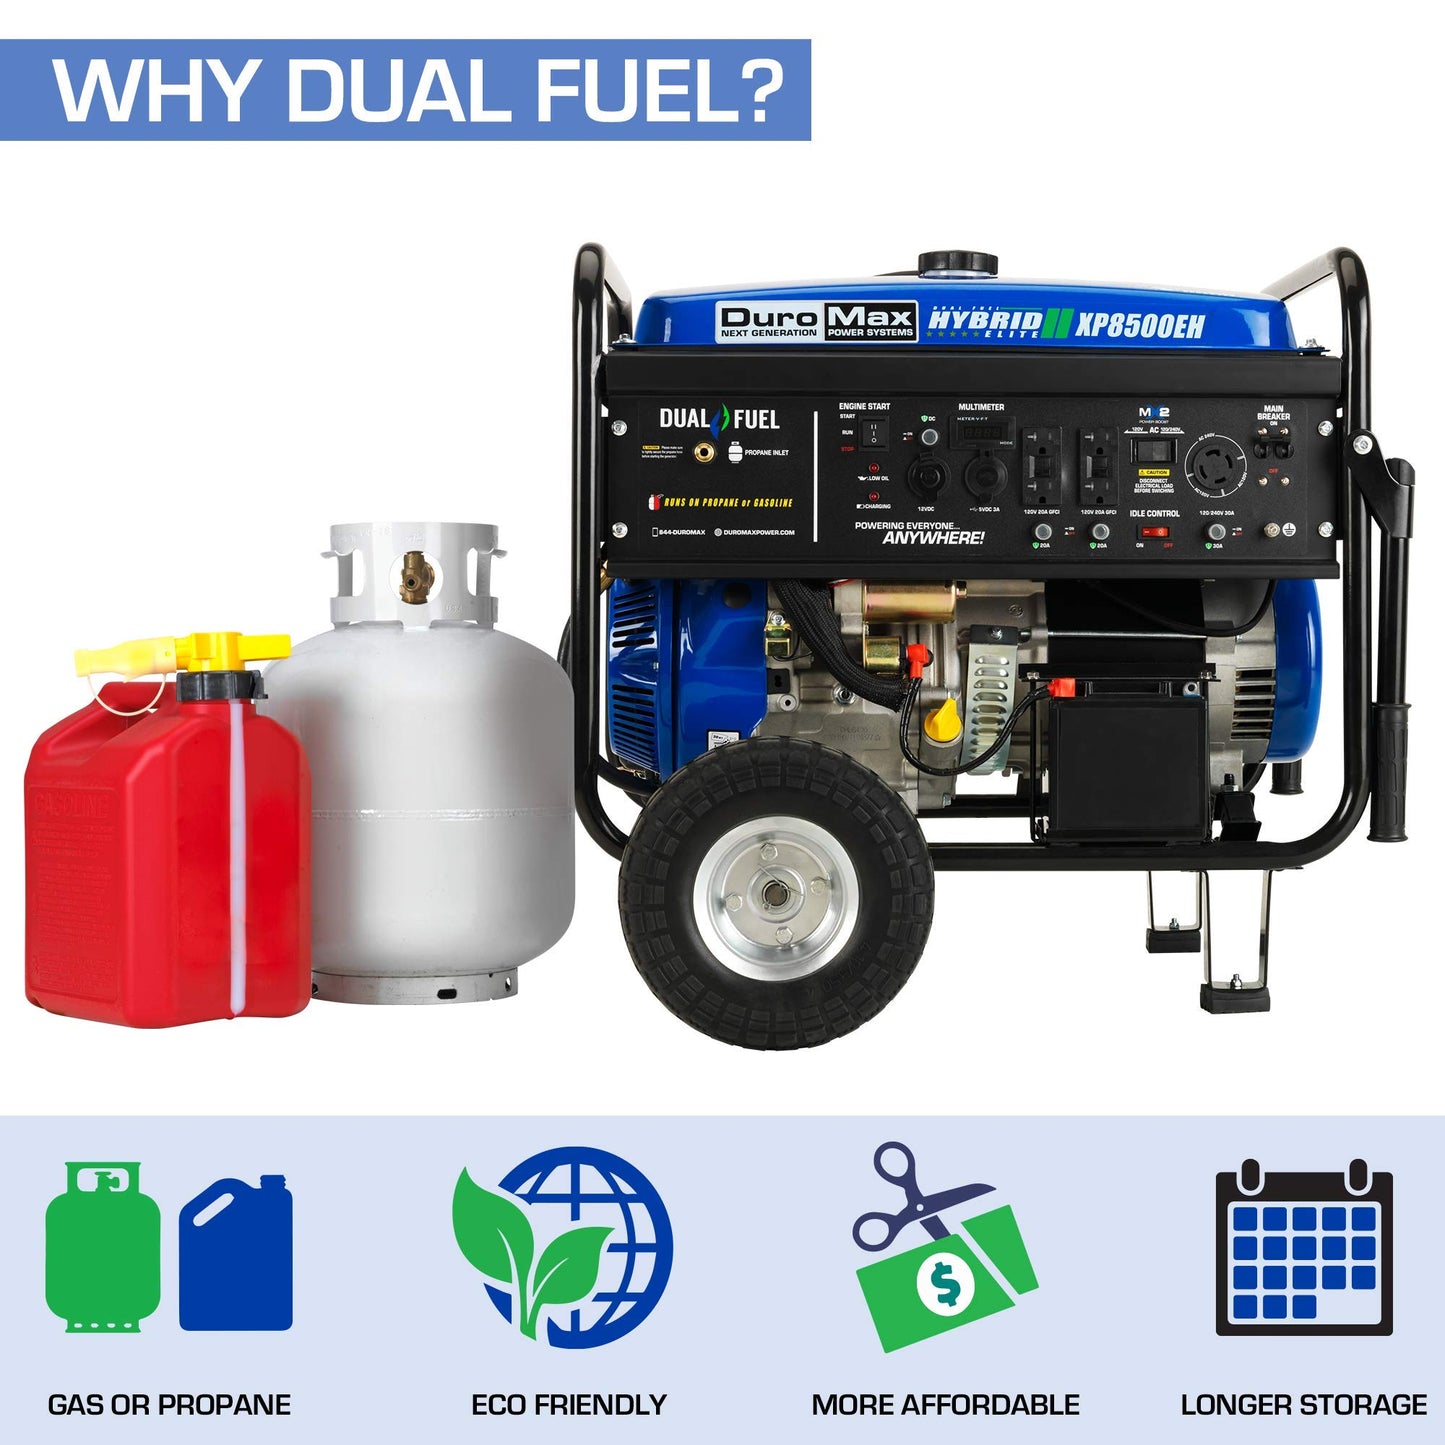 DuroMax XP8500EH Dual Fuel Portable Generator-8500 Watt Gas or Propane Powered with Electric Start